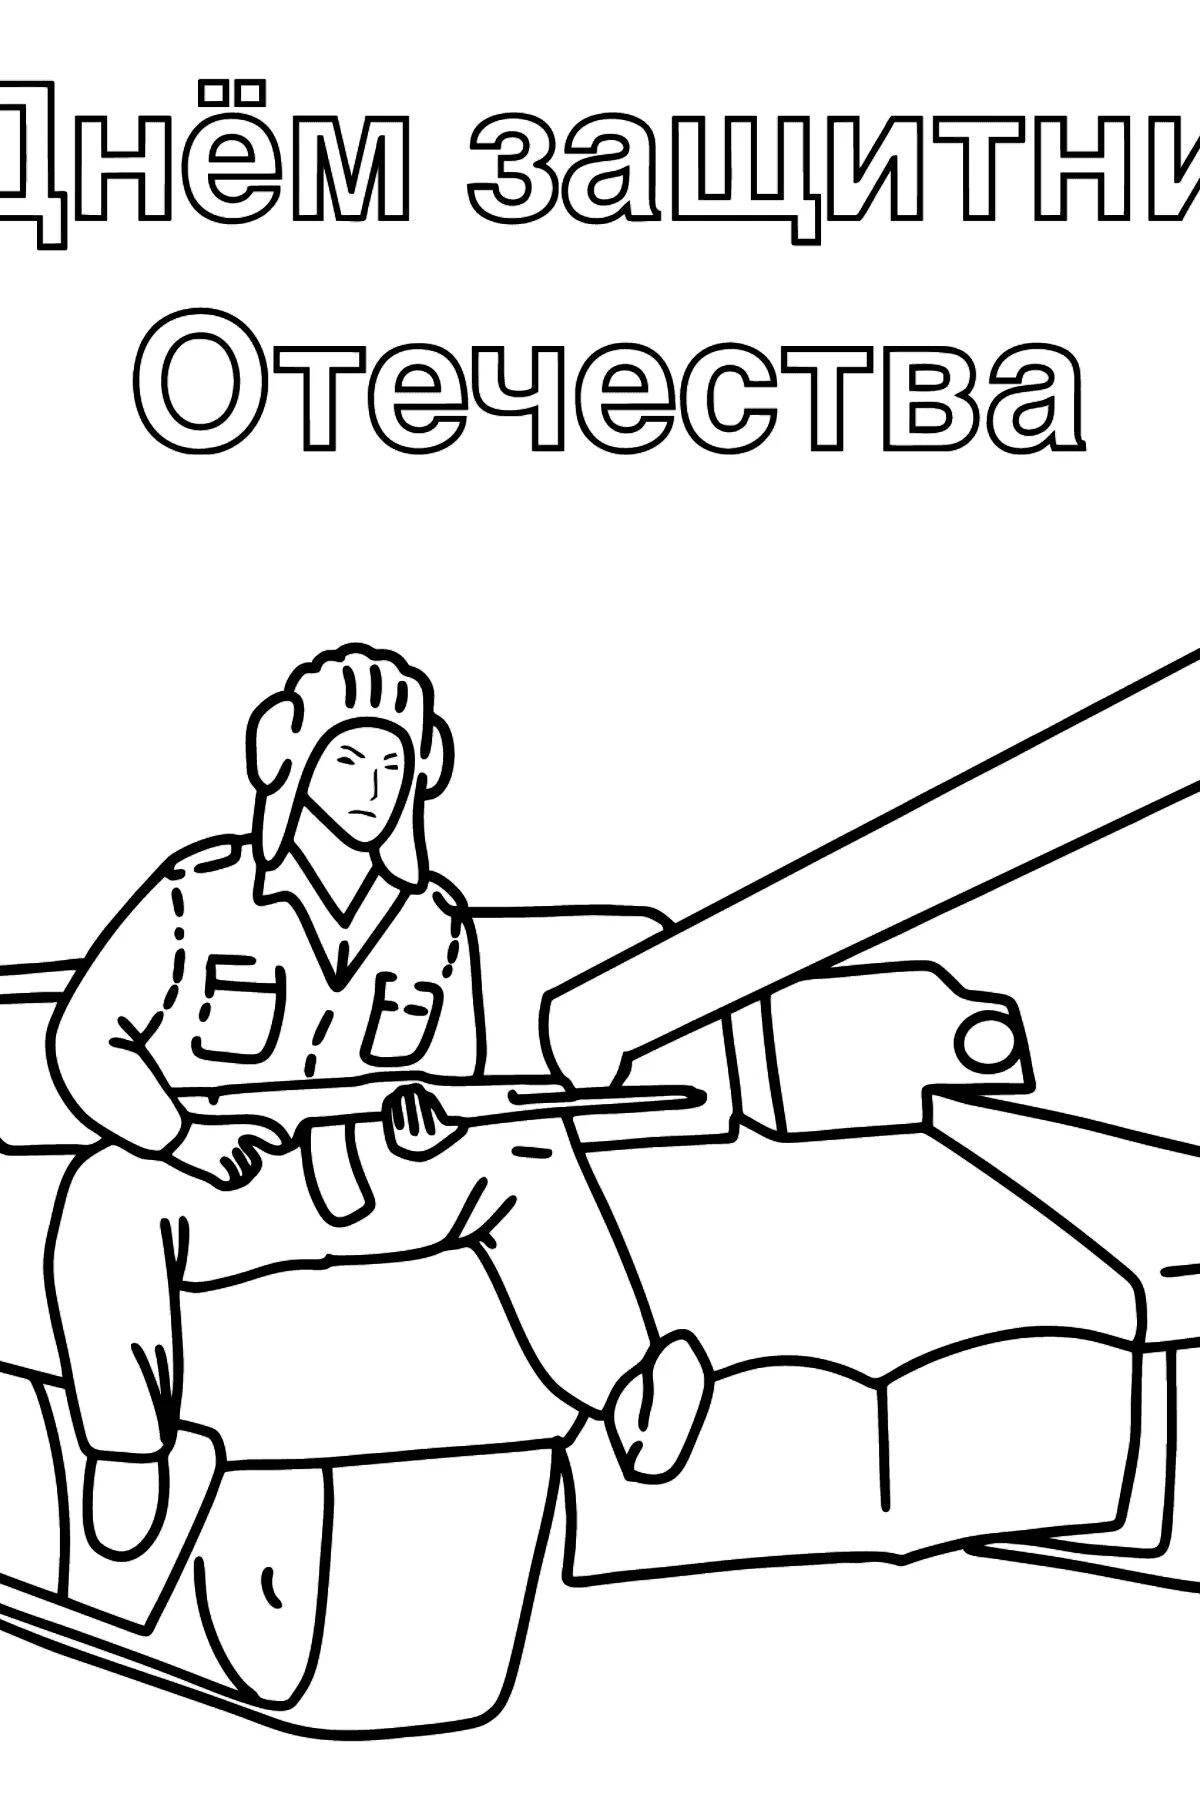 Adorable tank coloring page for preschoolers